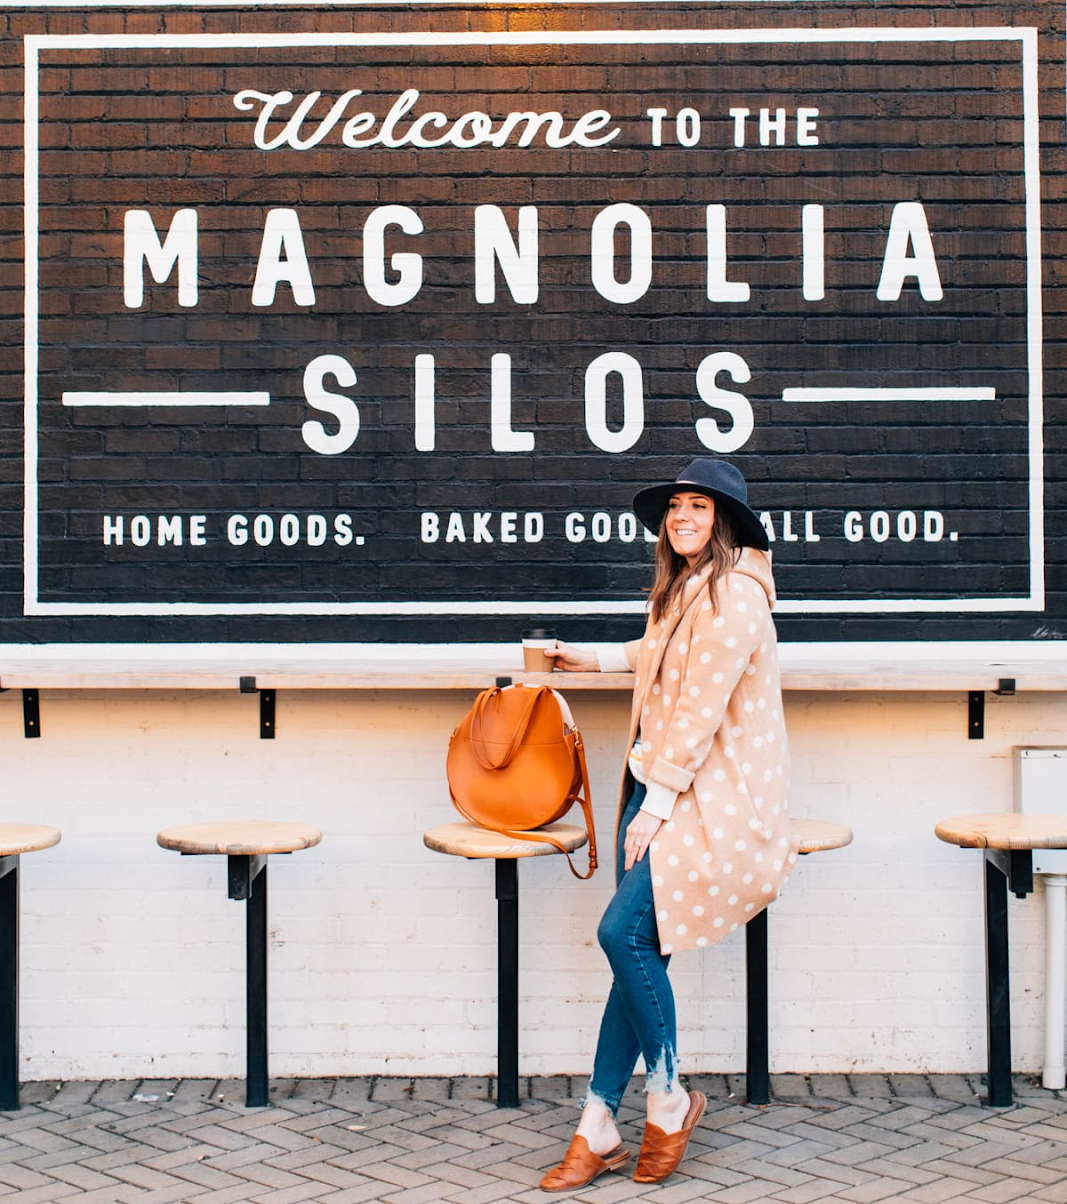 Magnolia Market- Welcome Emails For Online Communities